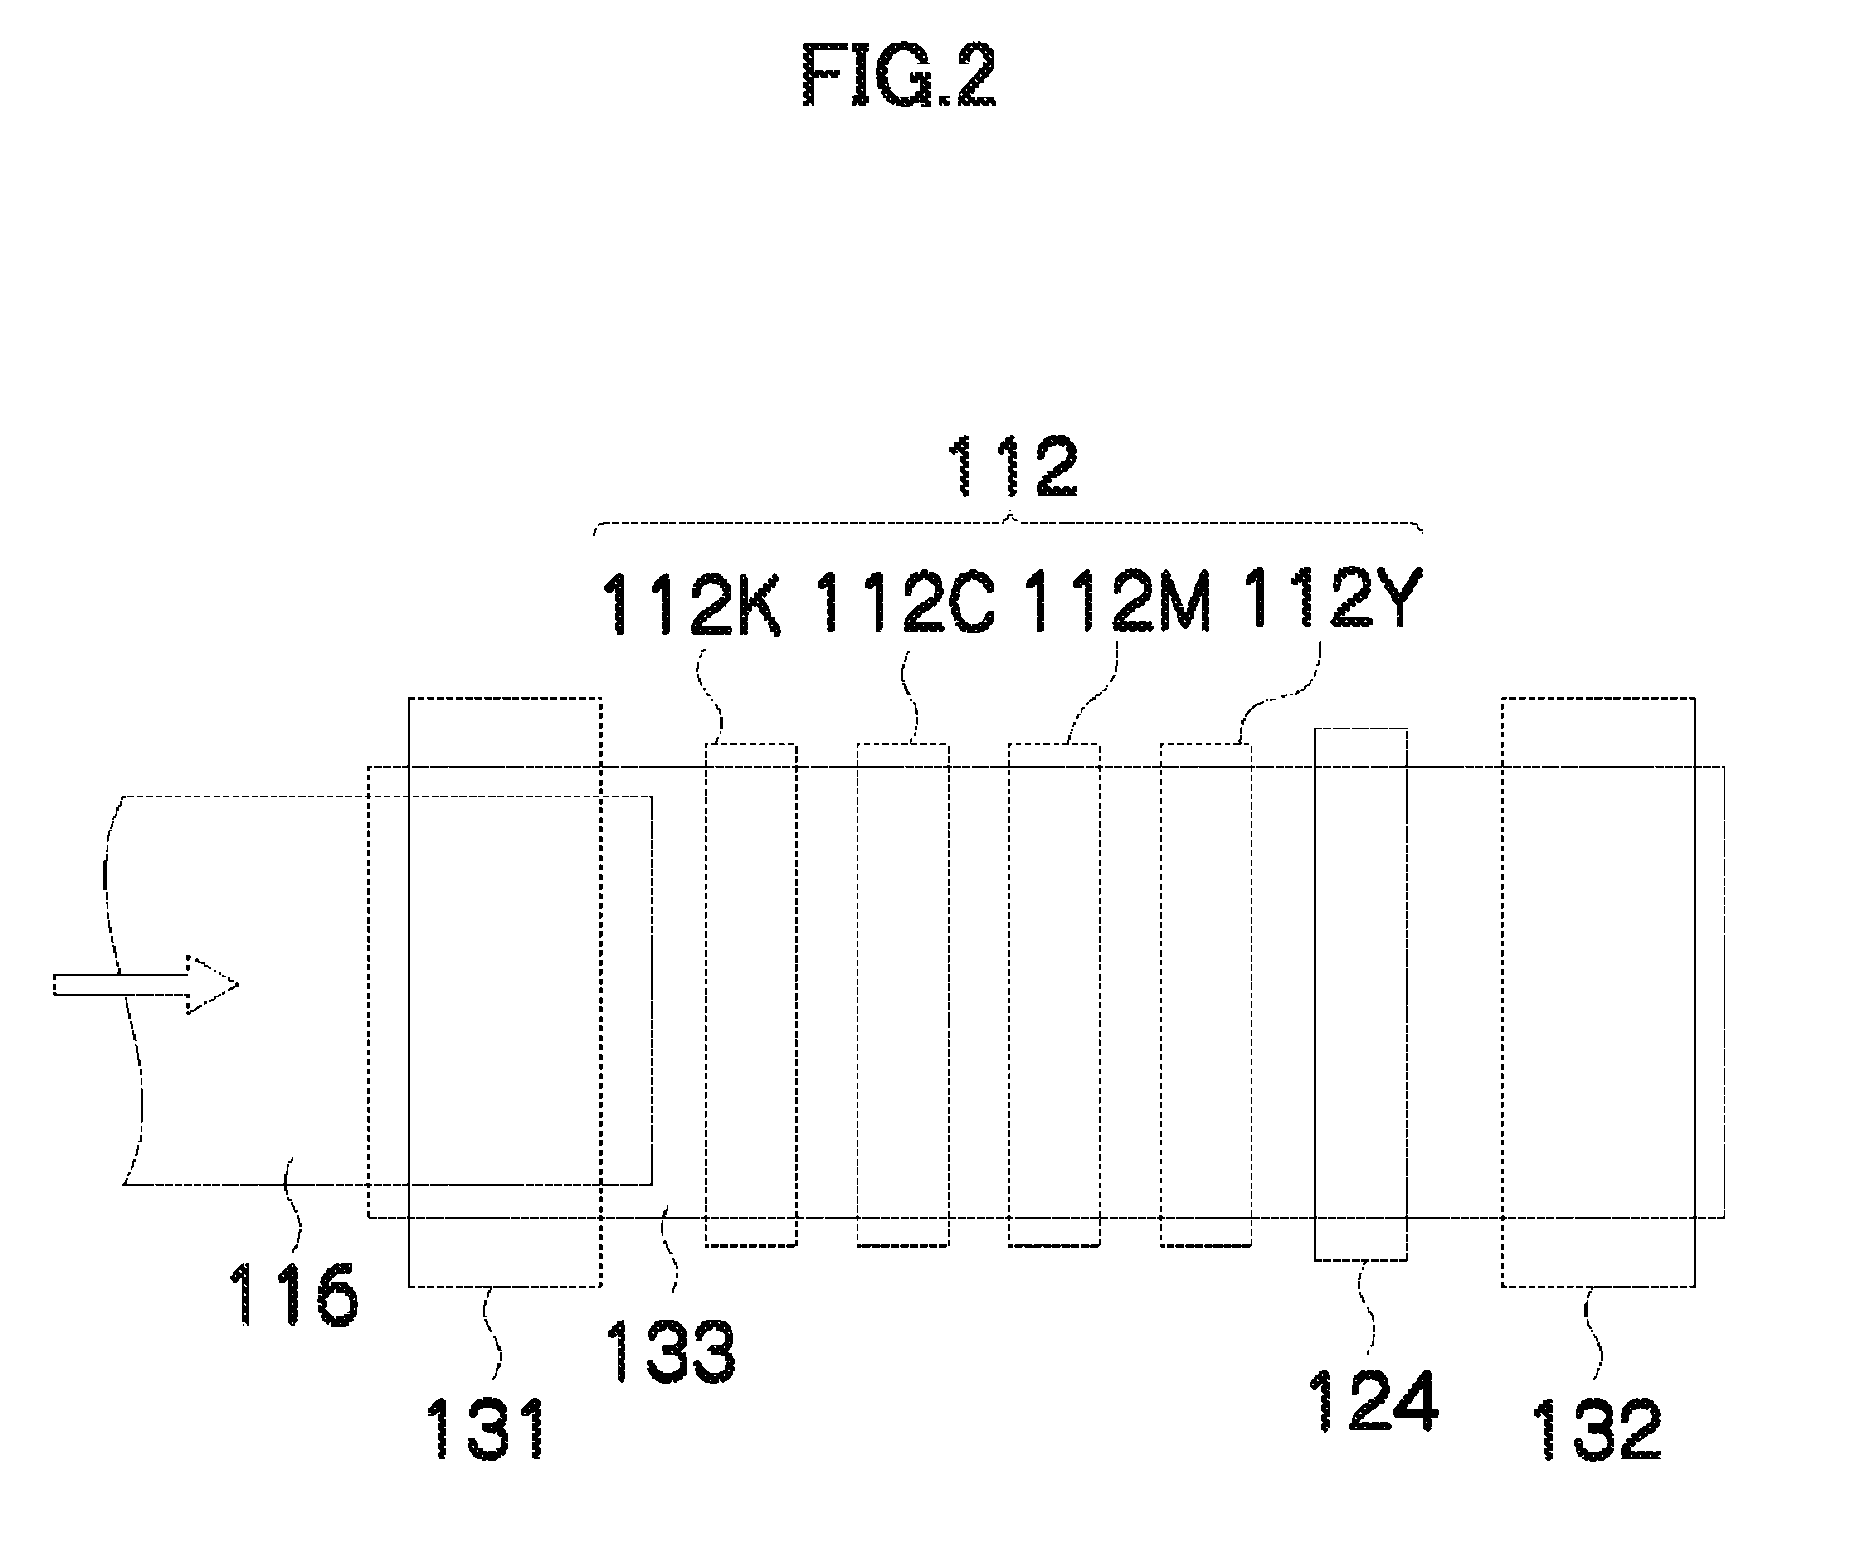 Image recording apparatus, image processing apparatus, image processing method and computer-readable medium for selecting a subsidiary image processing device